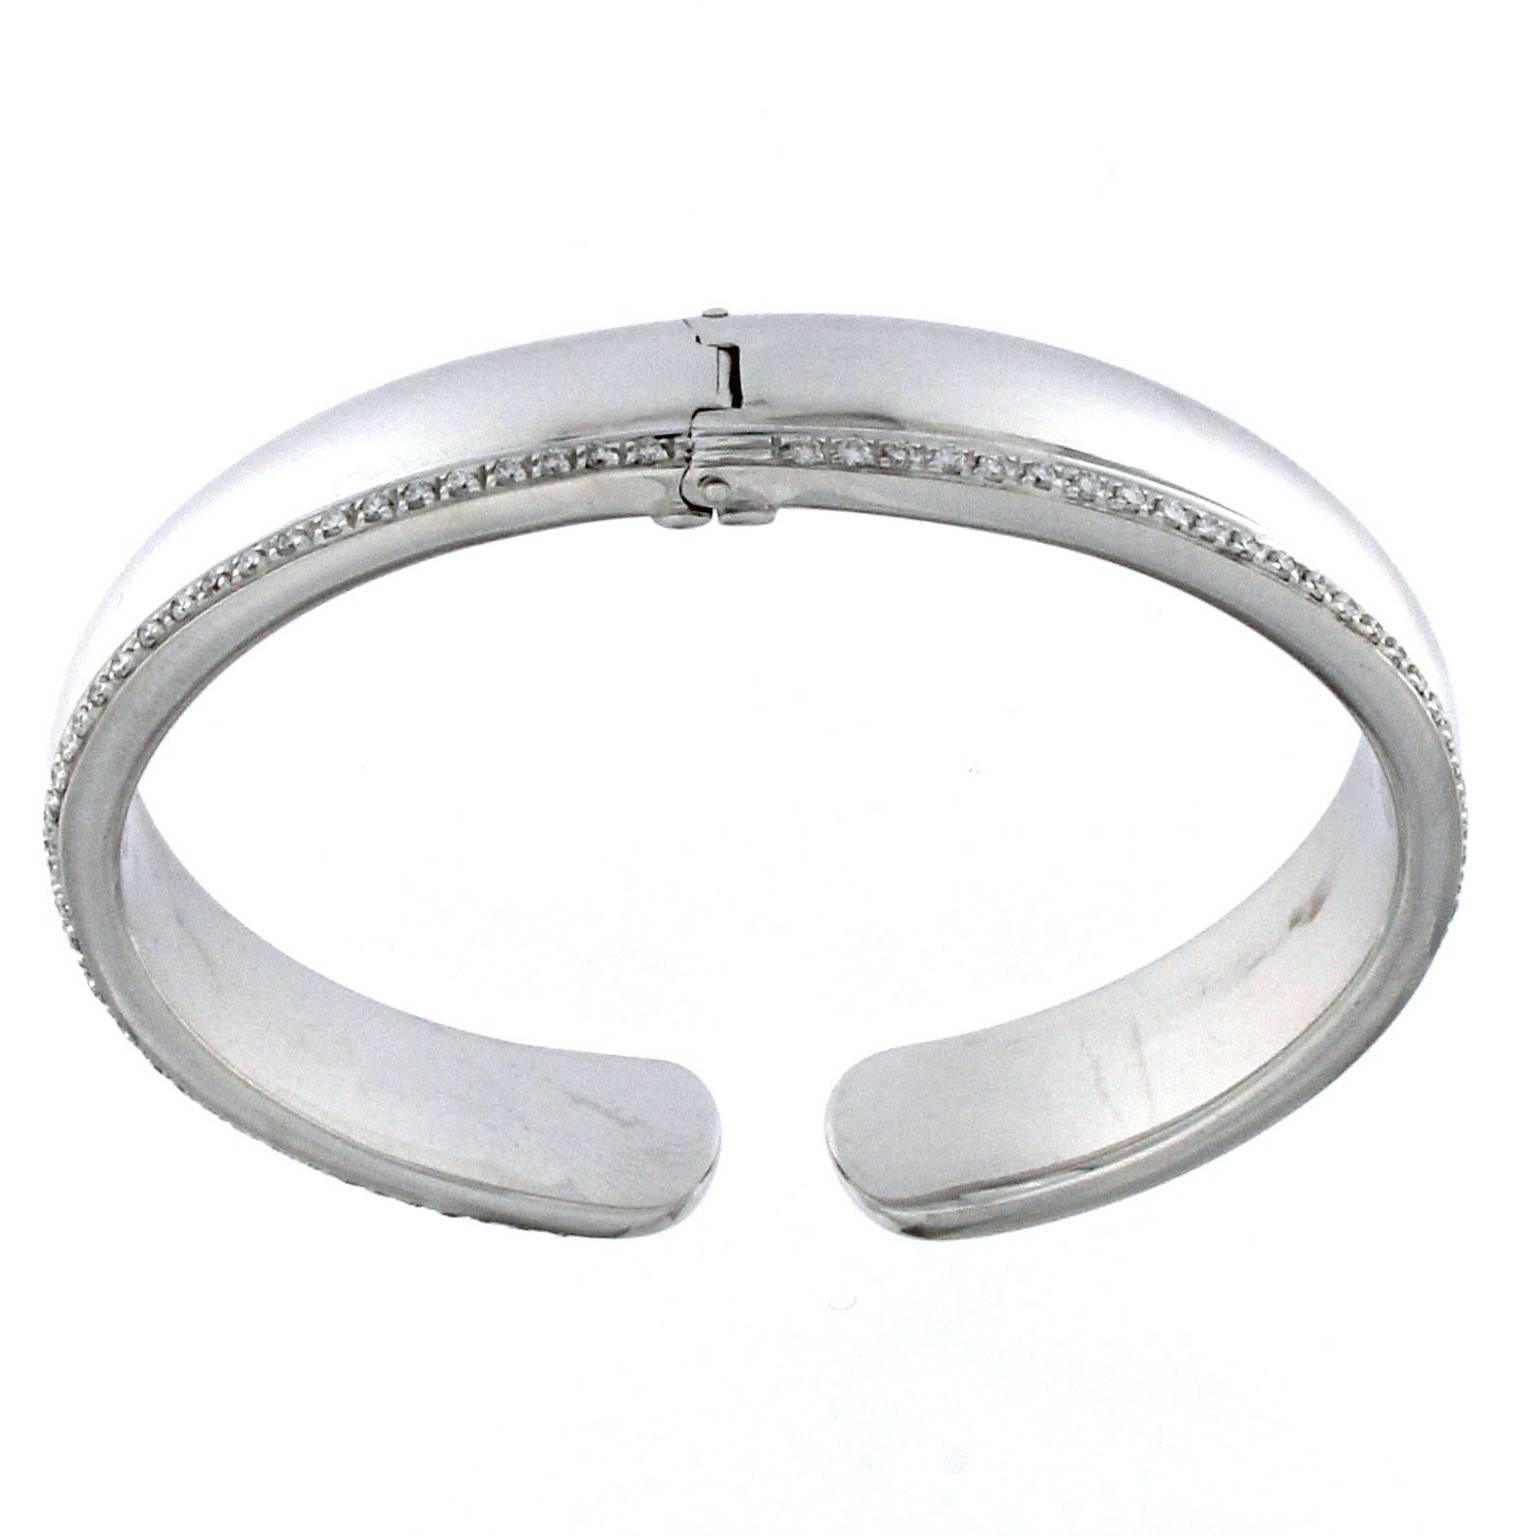 White gold bracelet made with an empty half-round cane to perfectly fit the woman's wrist. Forged on a template that reproduces the wrist fits perfectly. To wear it it winds in half with a spring.
This bracelet is part of the Comma Collection
The